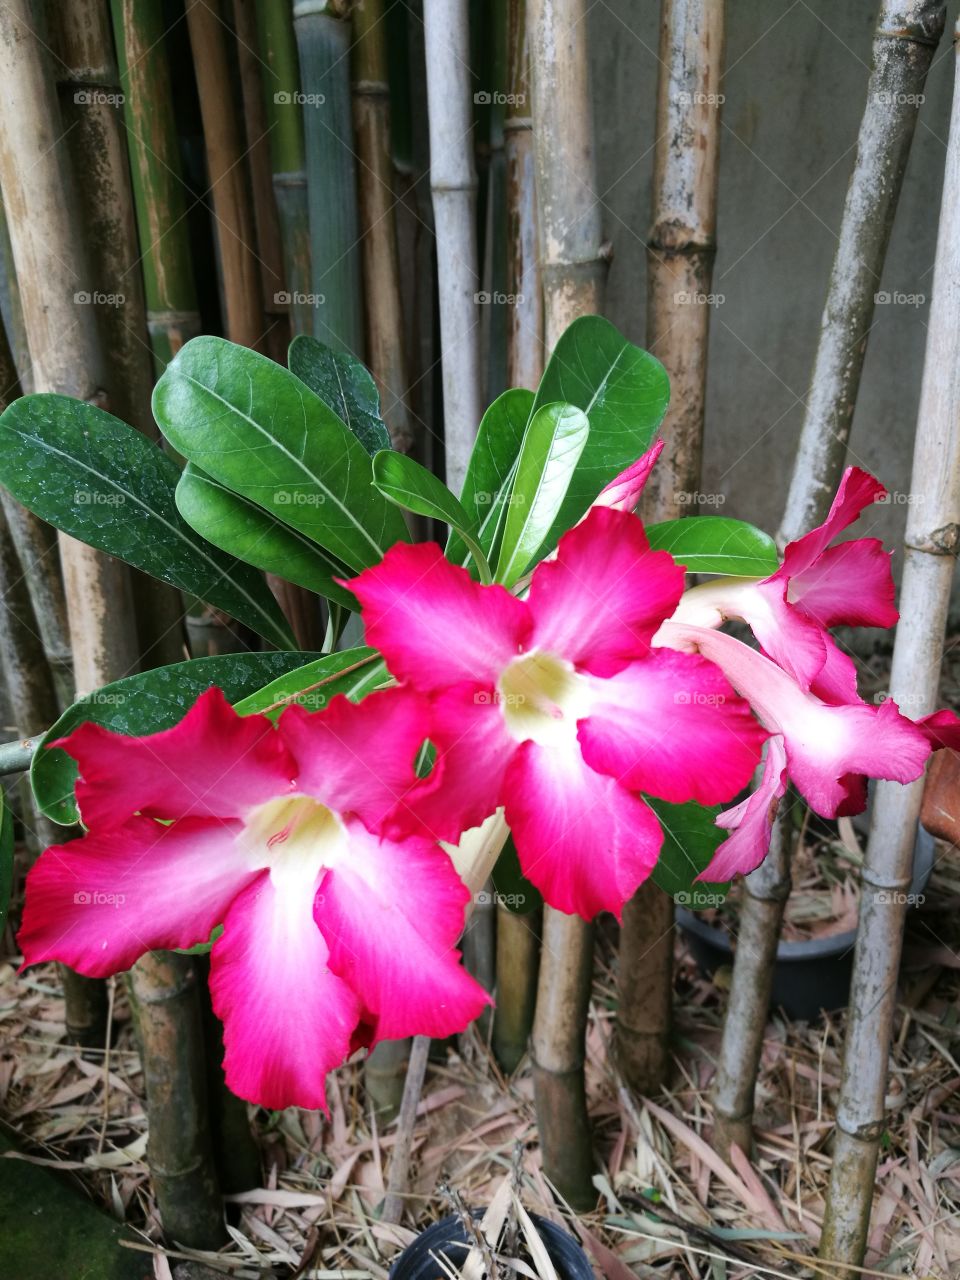 Impala lily with background of bamboo trees.